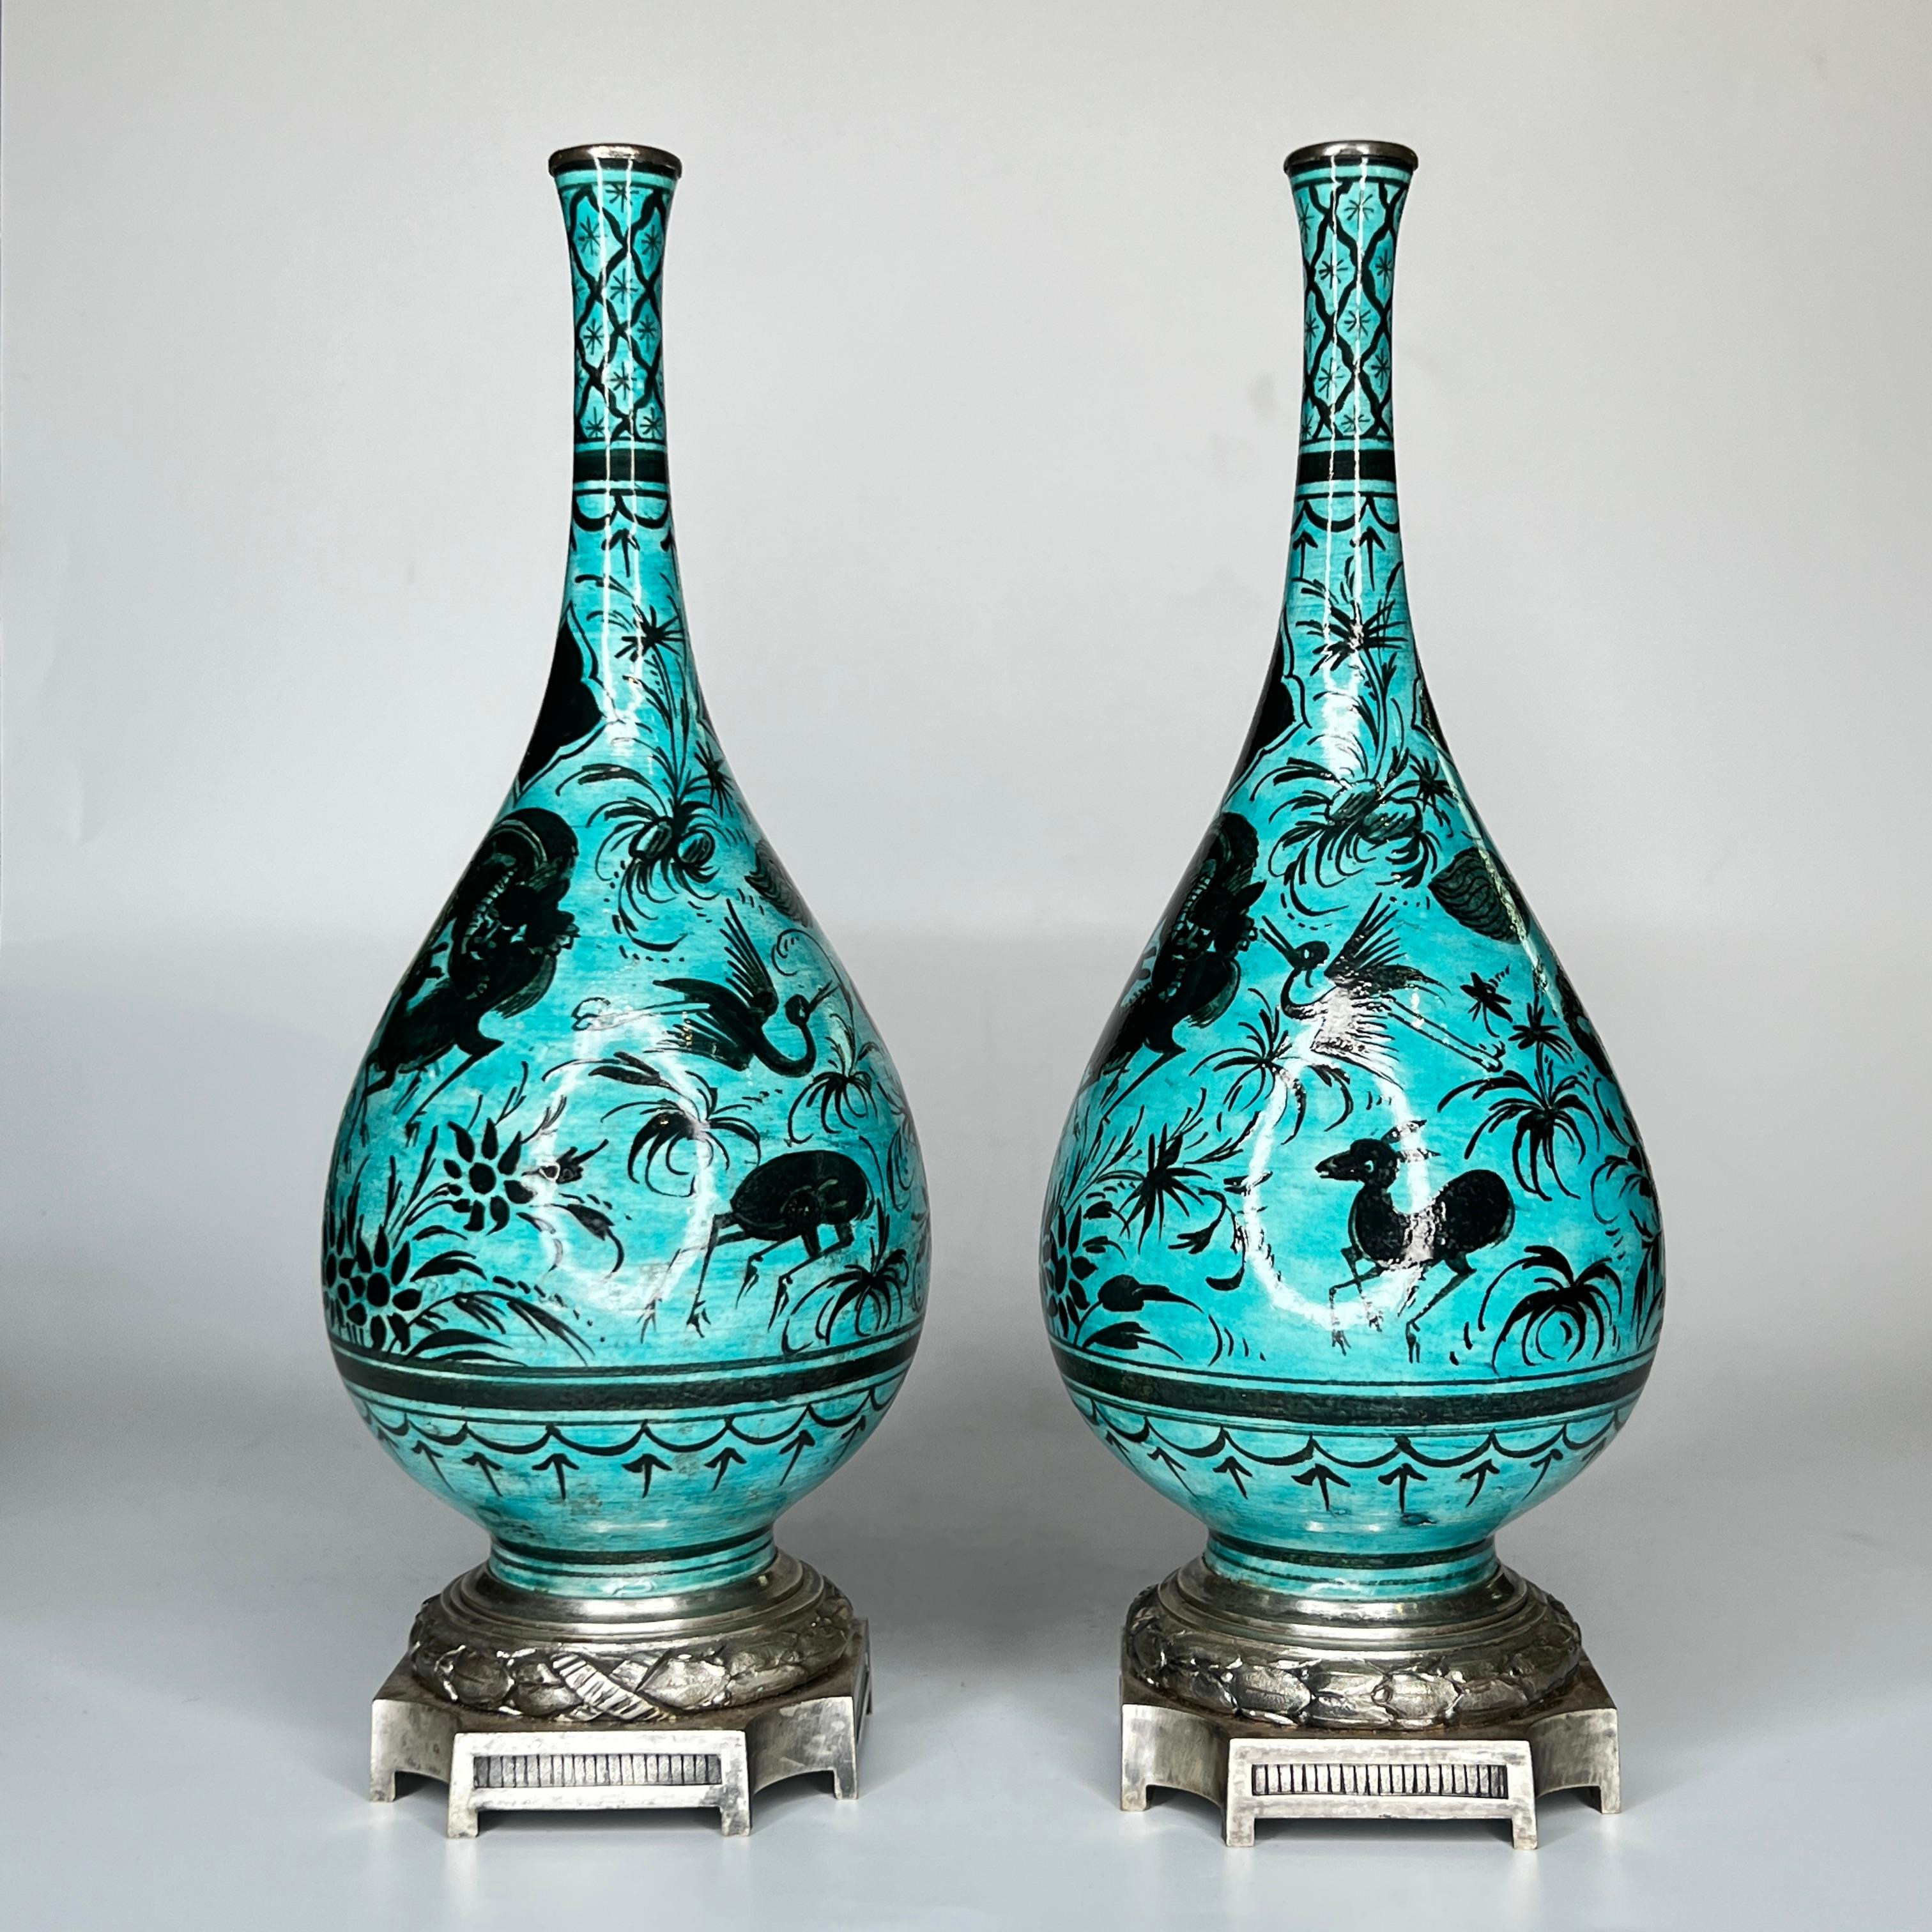 Persian Ware Ceramic Bottle Vases Attributed to Samson et Cie In Good Condition For Sale In New York, US